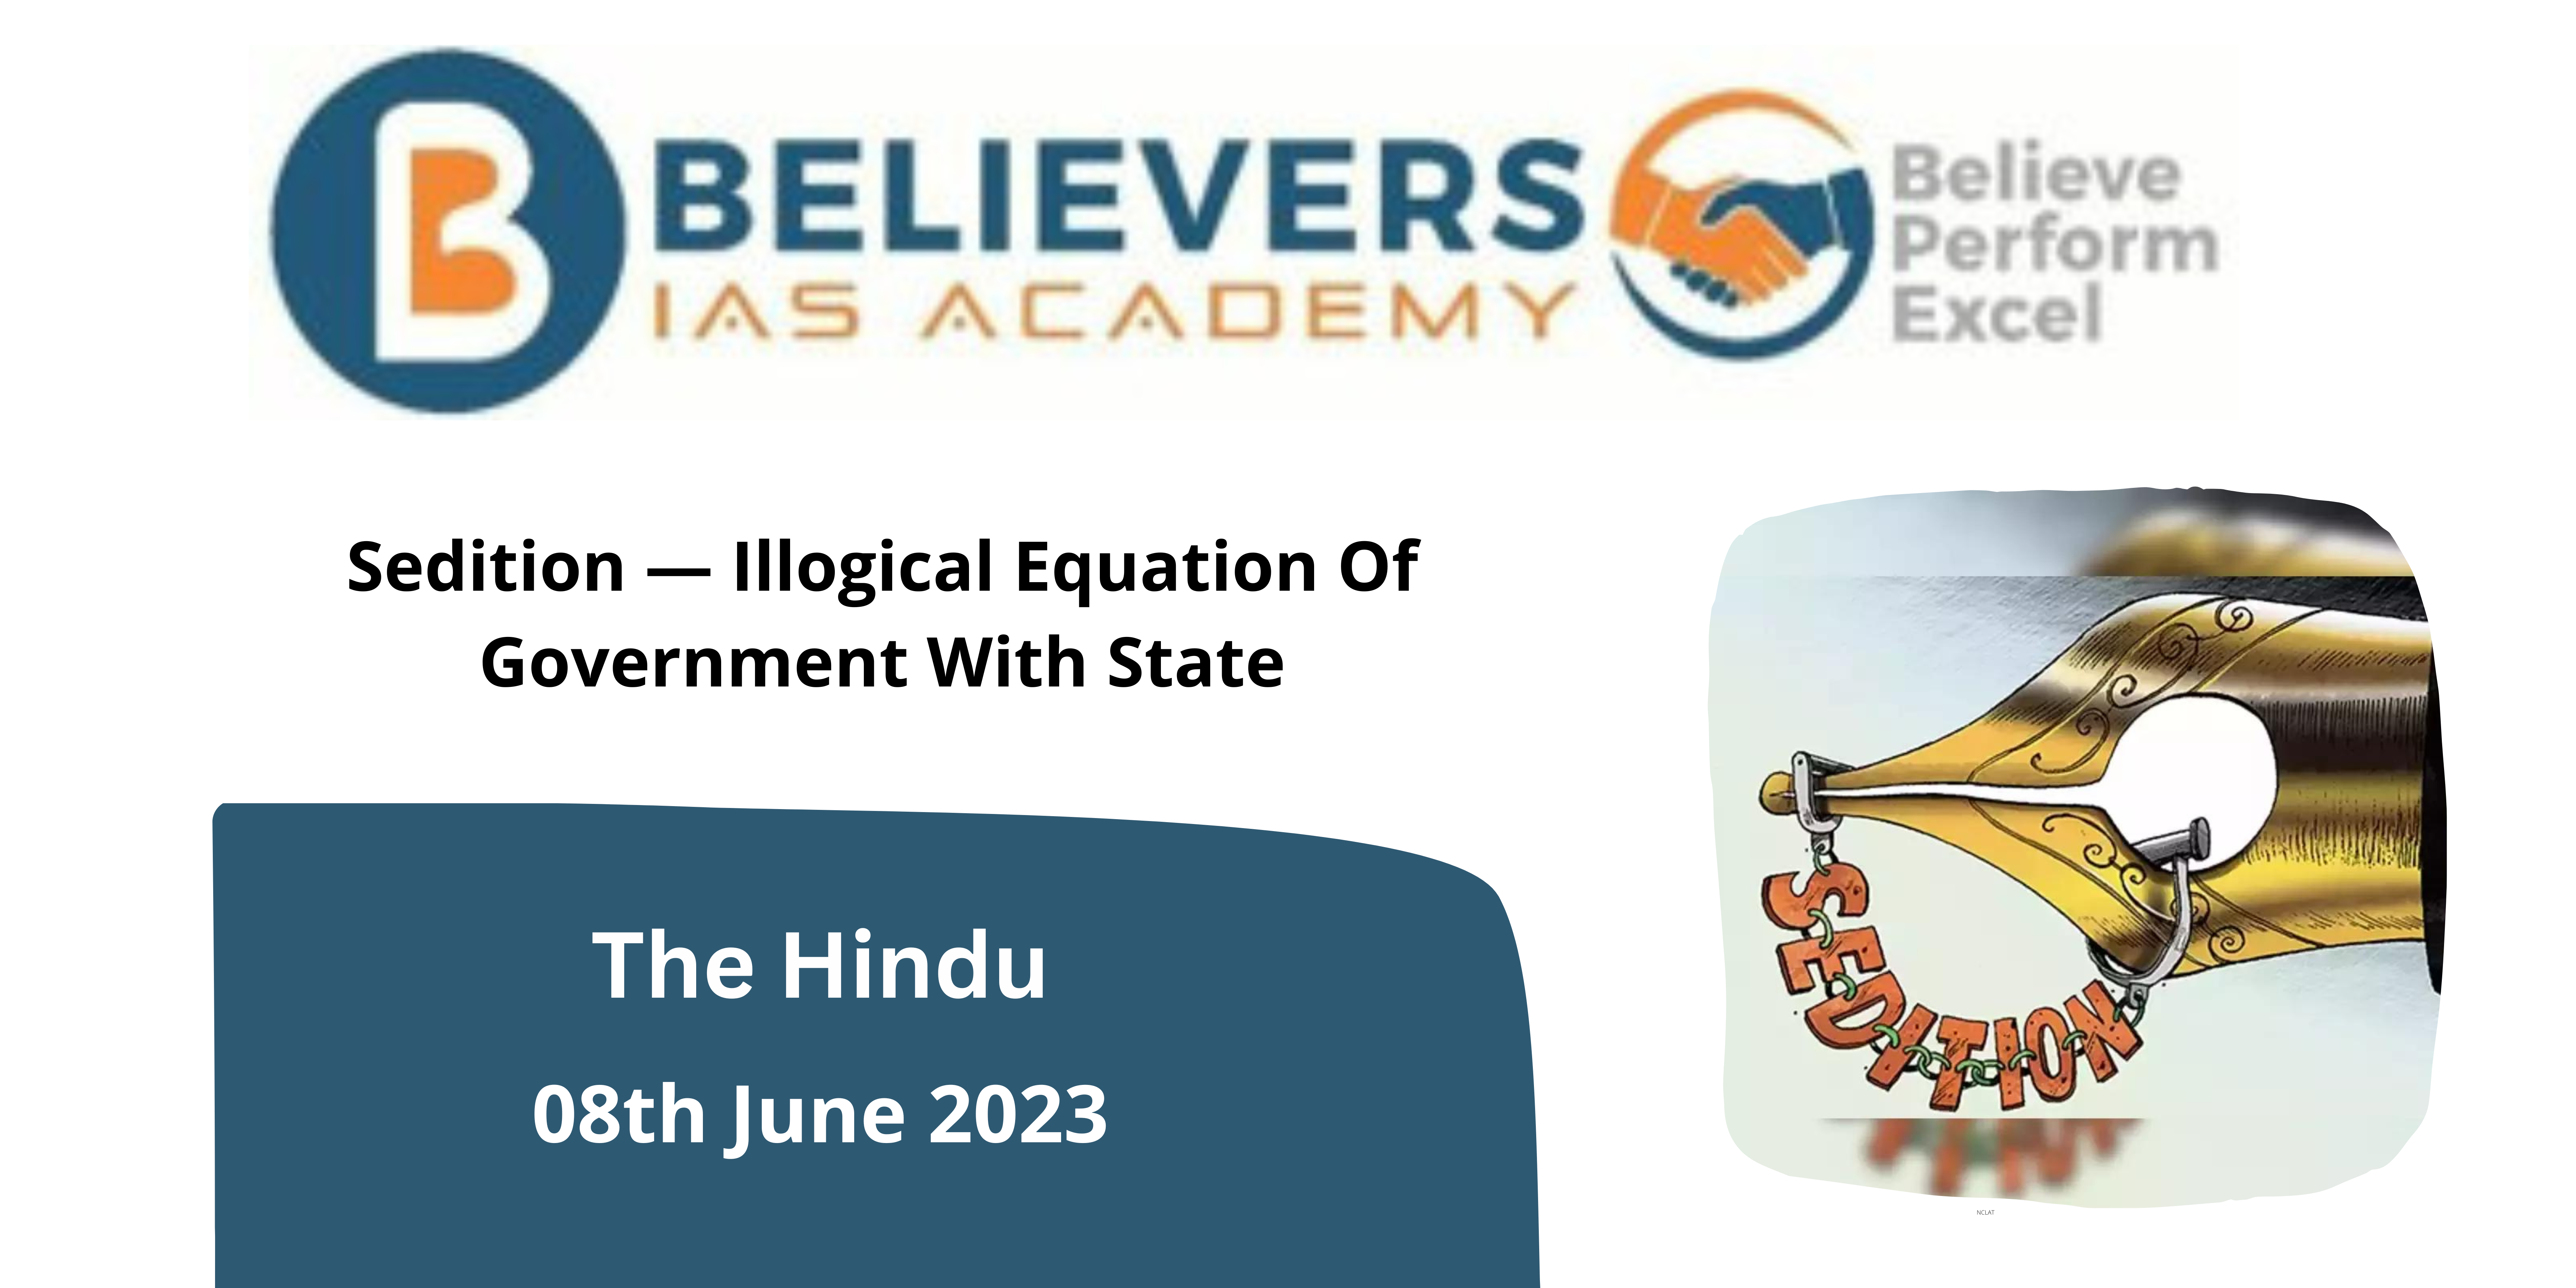 Sedition — Illogical Equation Of Government With State